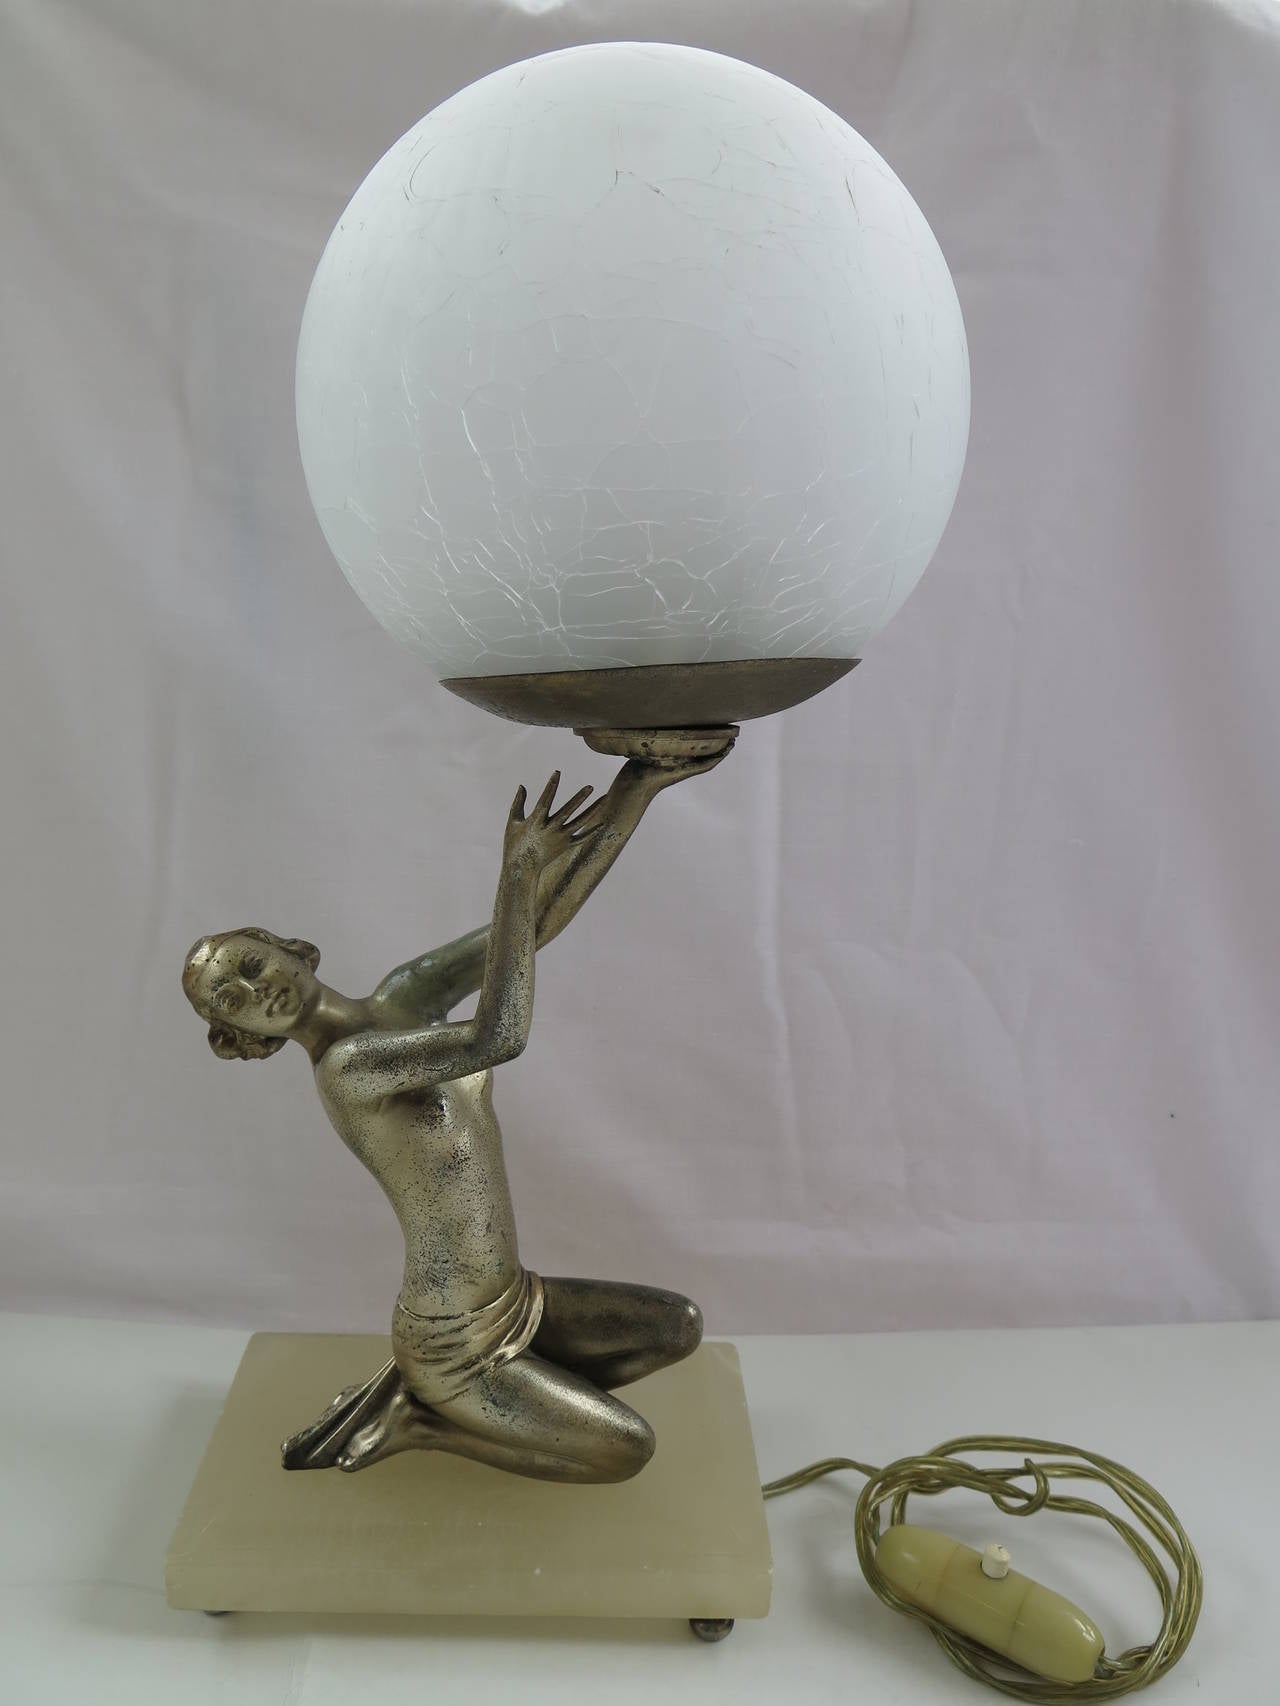 This is a very good table lamp, original to the Art Deco period.

The shelter lamp has a lady in a kneeling position holding the lamp above her head. The lady figurine is slim and scantily clad in just a skirt, typical of the stylized figures of